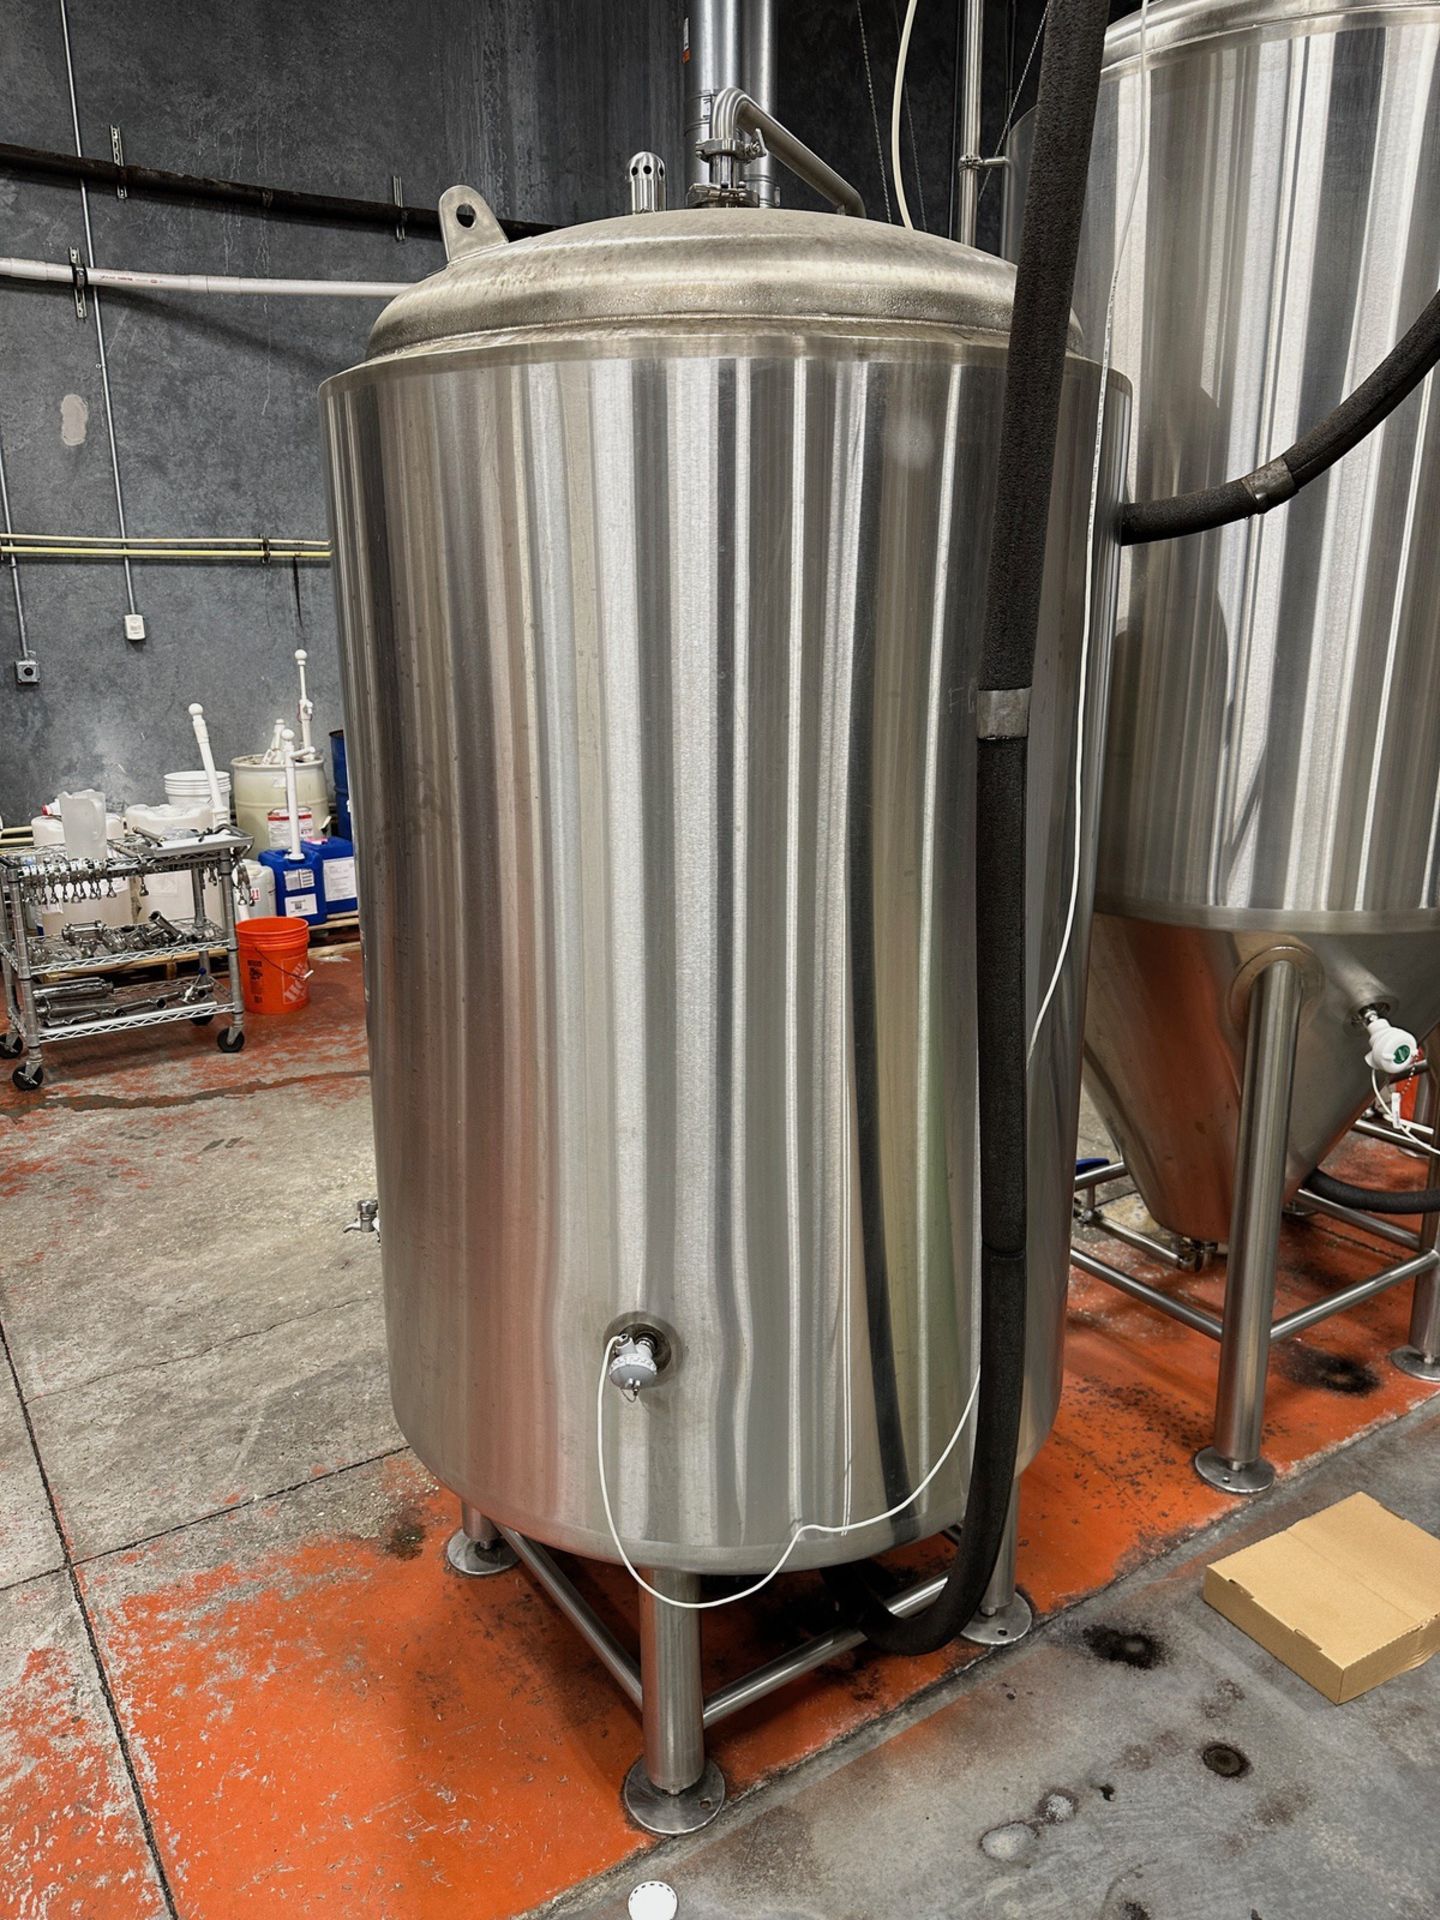 2017 Premier Stainless 10 BBL Brite Tank - Dish Bottom, Glycol Jacketed, Mandoor, C | Rig Fee $1000 - Image 2 of 2